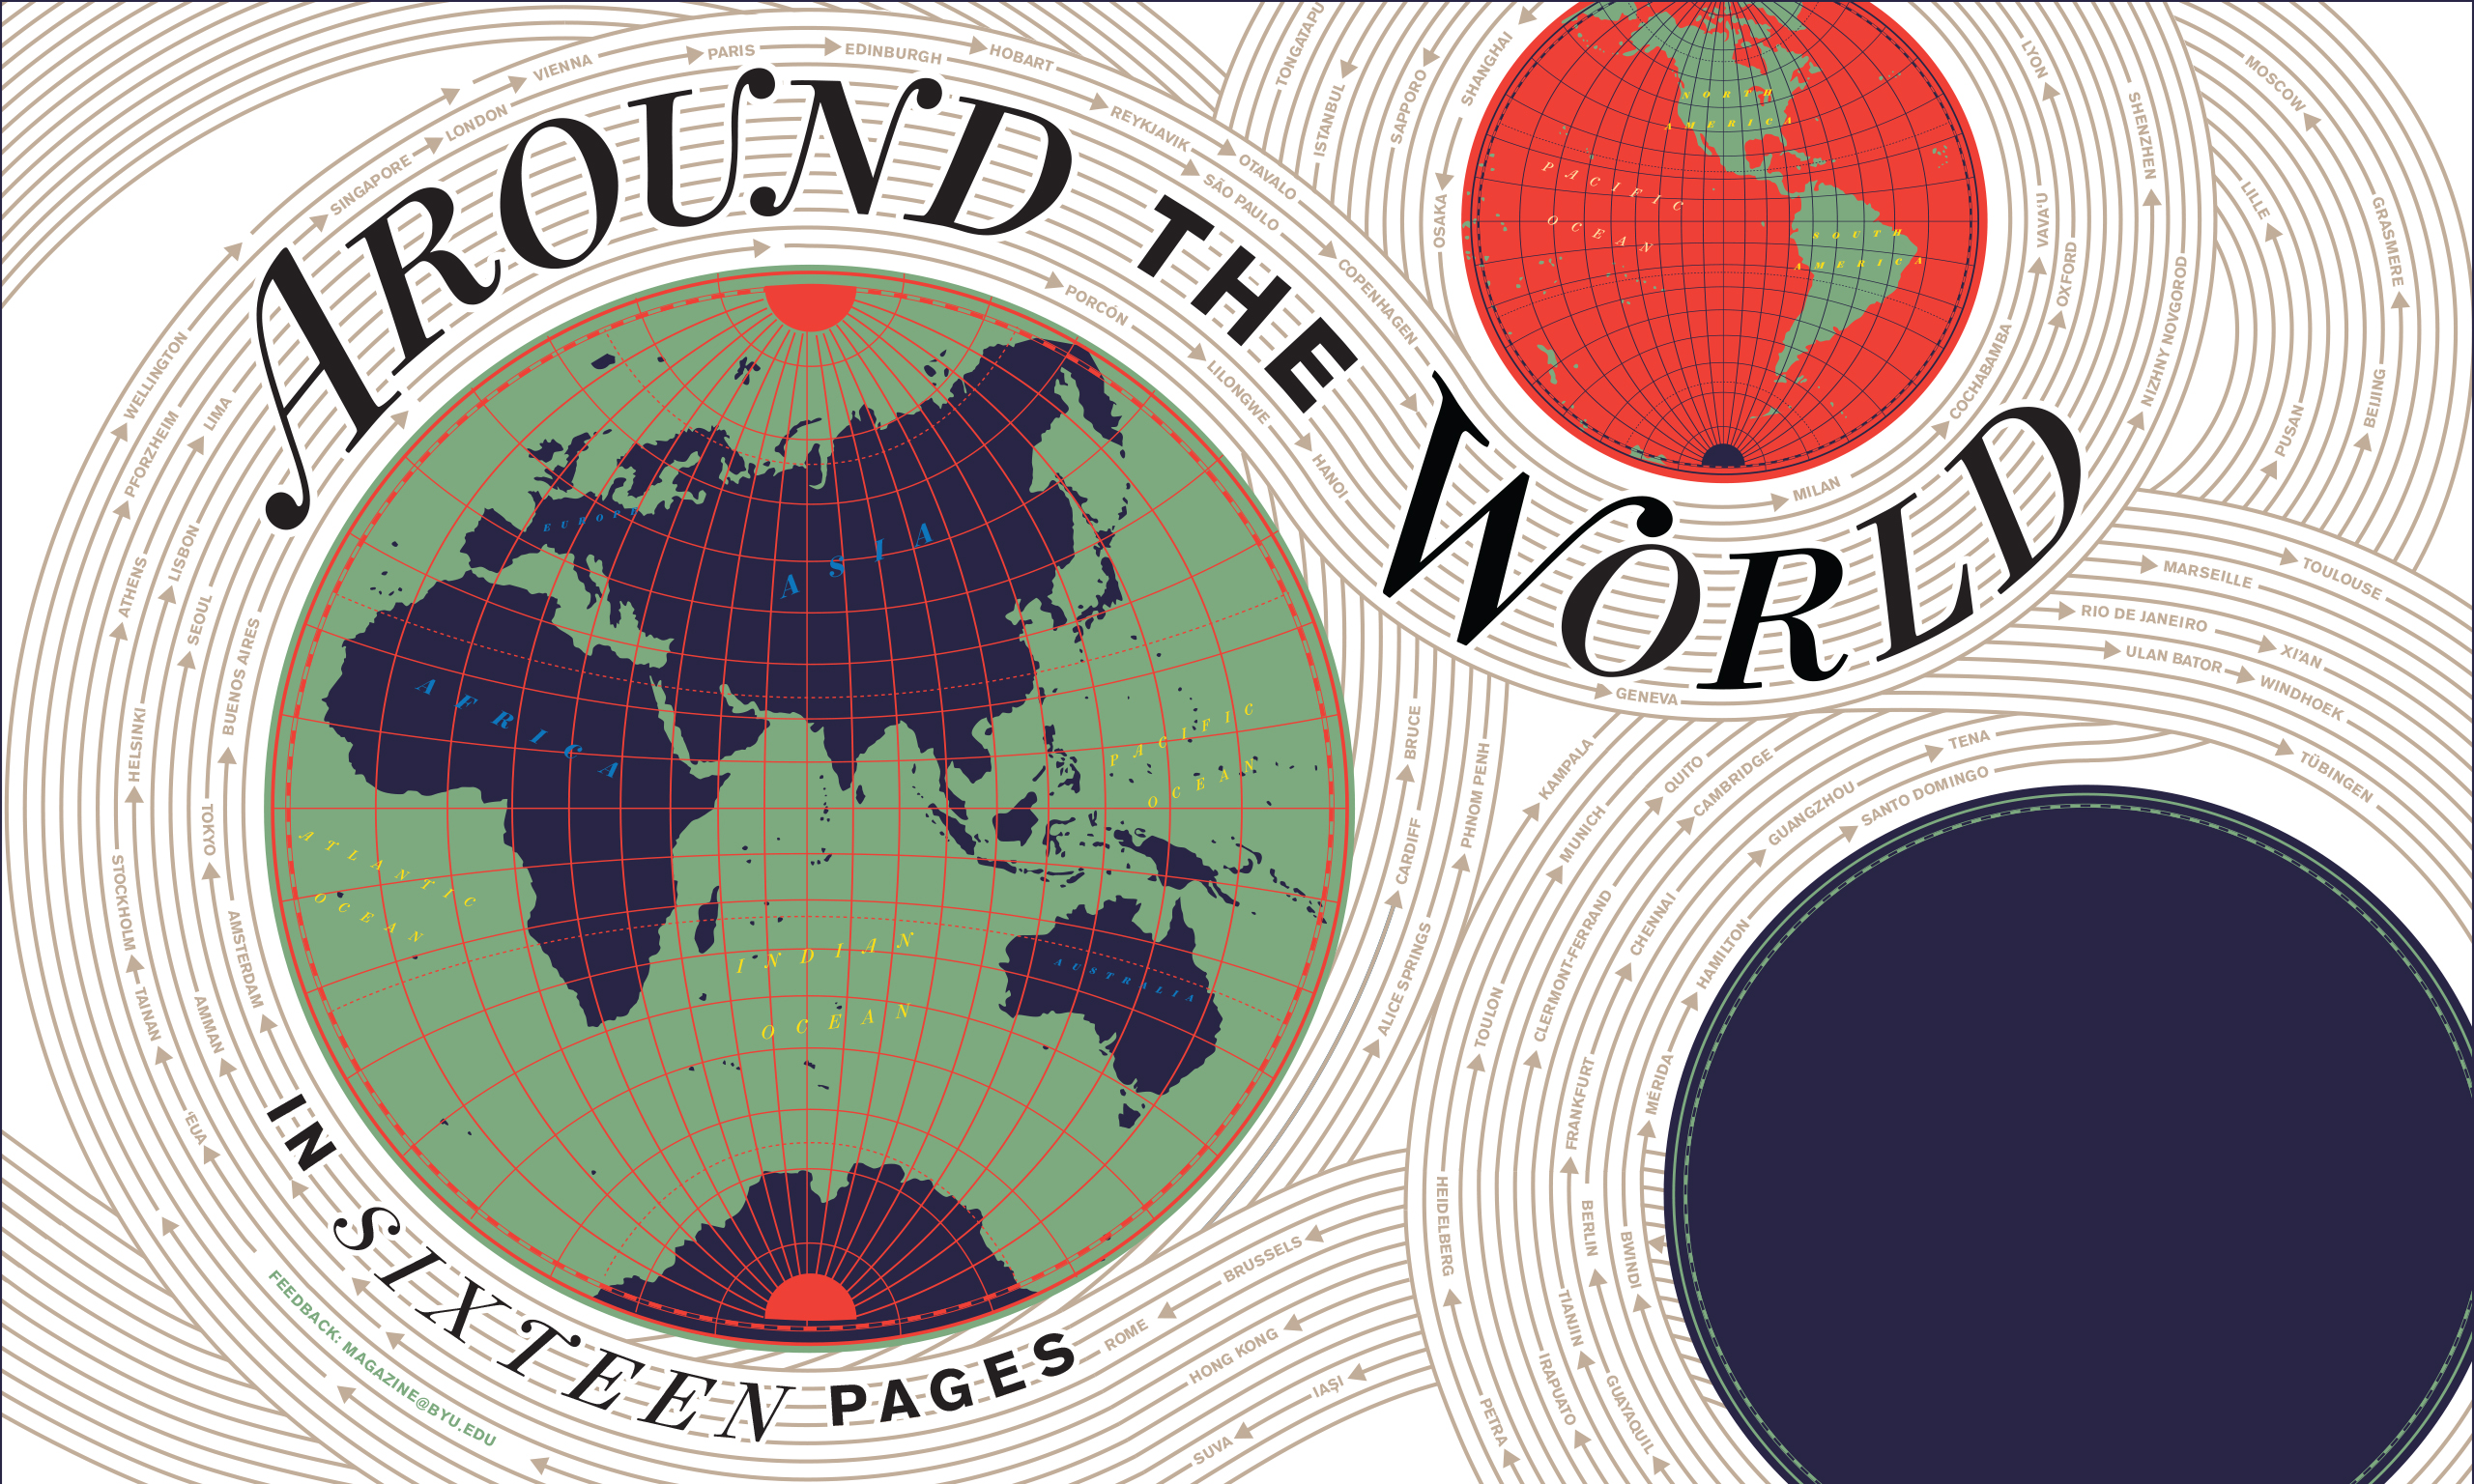 Stylized treatment of the text "Around the World in Sixteen Pages" with two globes with labels pointing to different countries